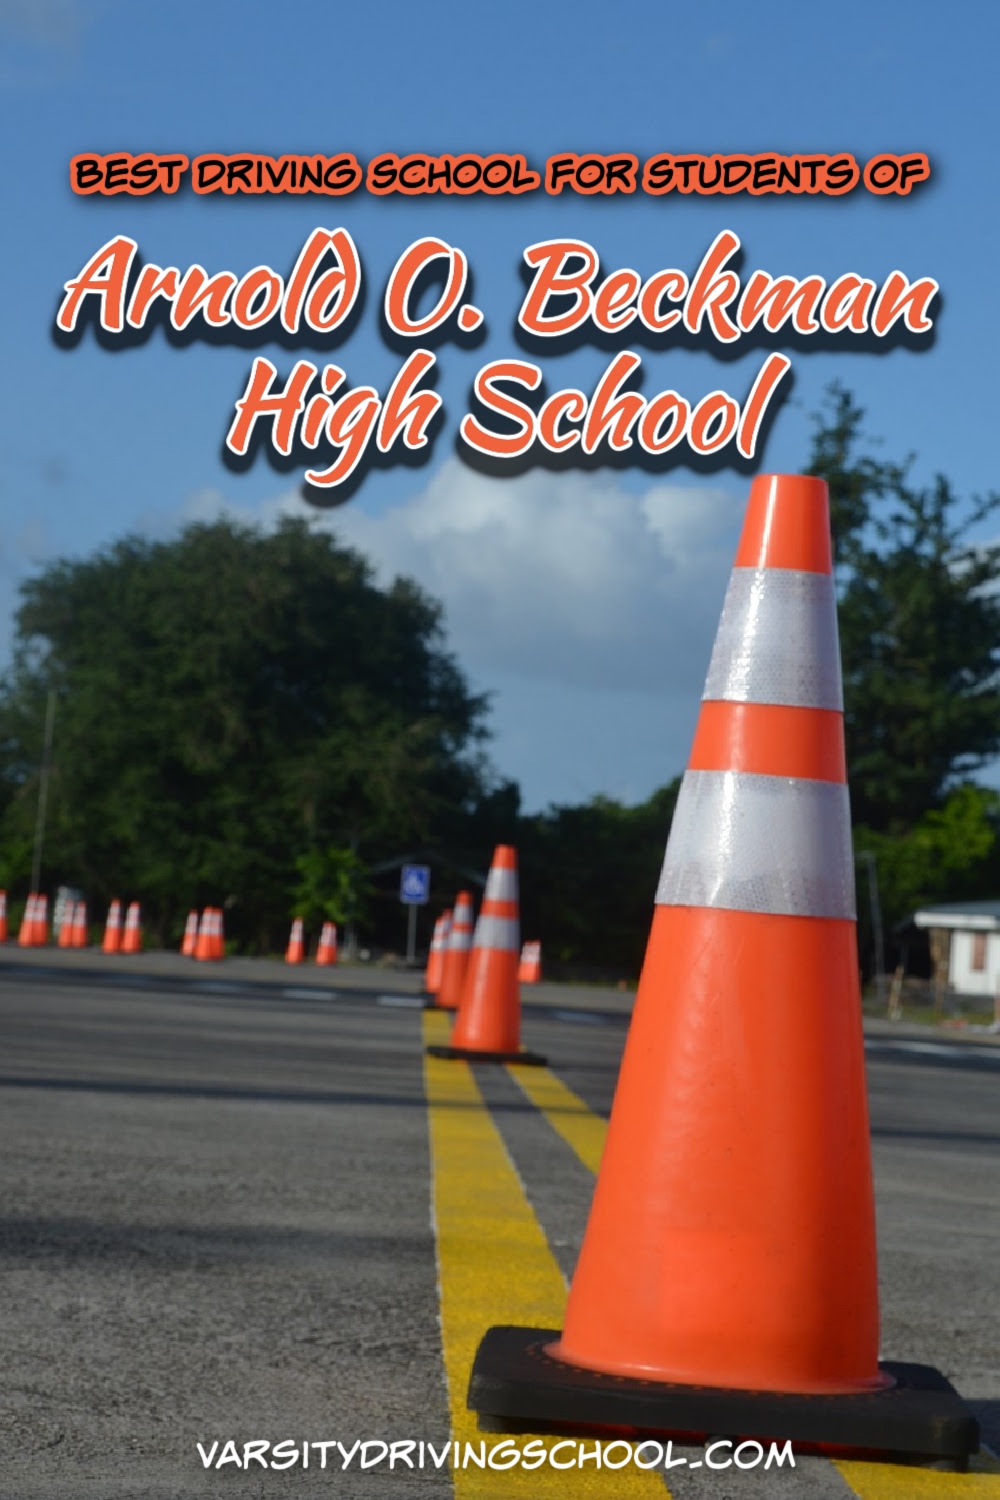 The best Arnold O Beckman High School driving school is Varsity Driving School, where students will learn defensive driving and more.